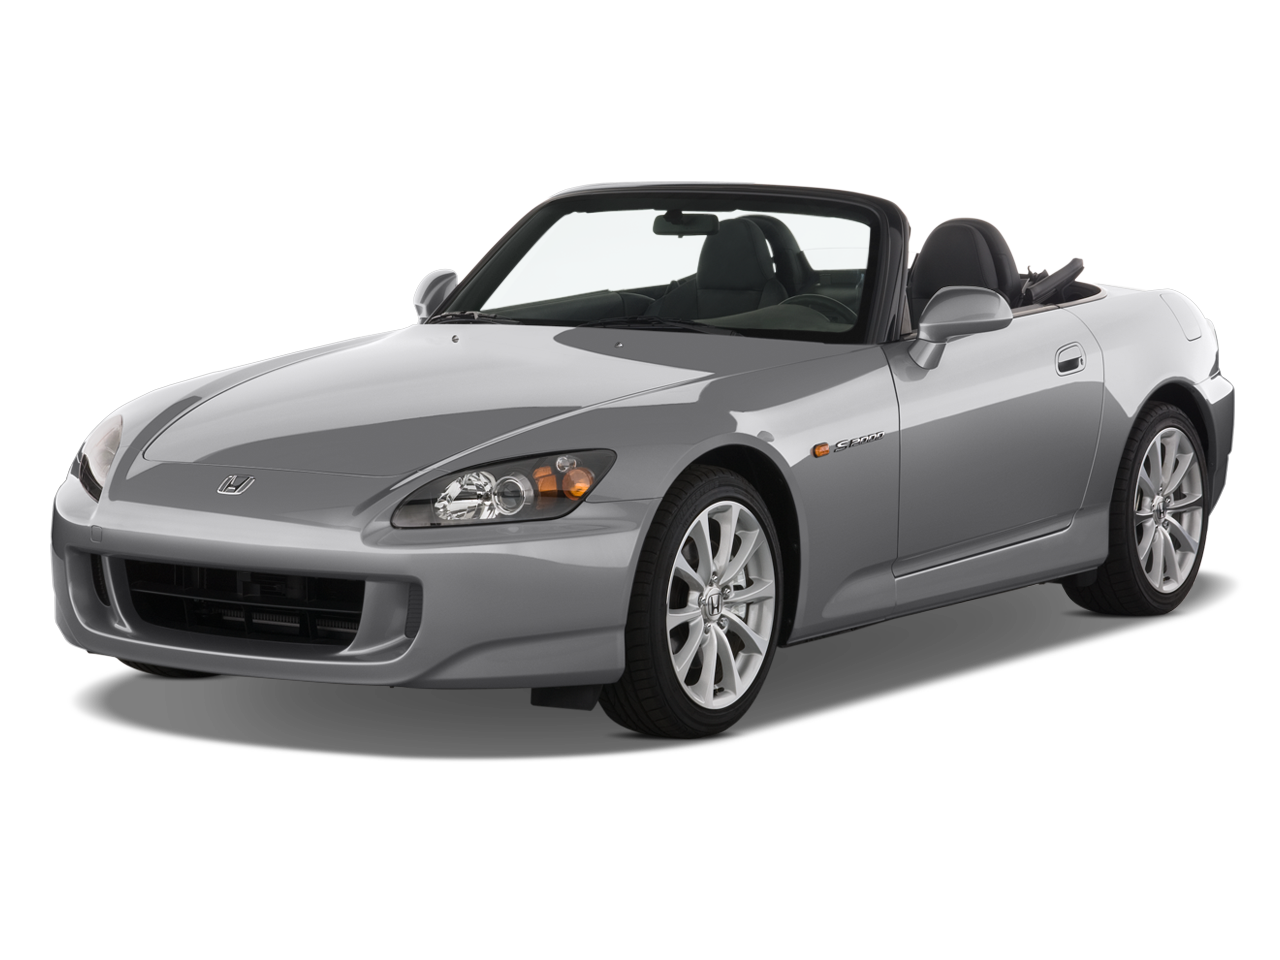 2009 Honda S2000 Prices, Reviews, and Photos - MotorTrend